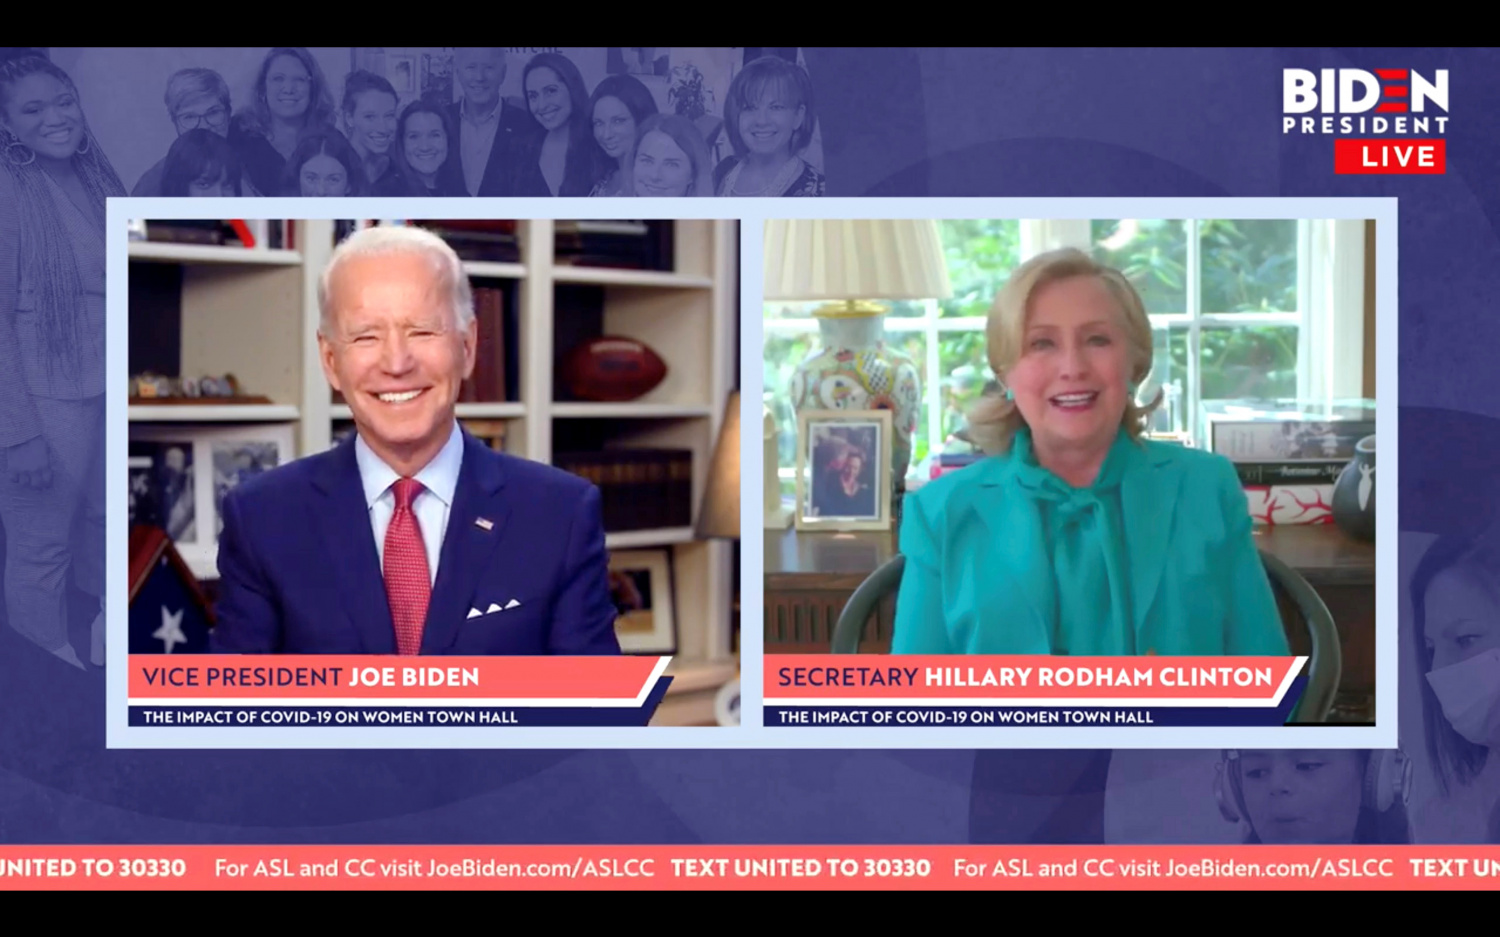 Democratic U.S. presidential candidate Joe Biden reacts as Hillary Clinton endorses him for president during online town hall